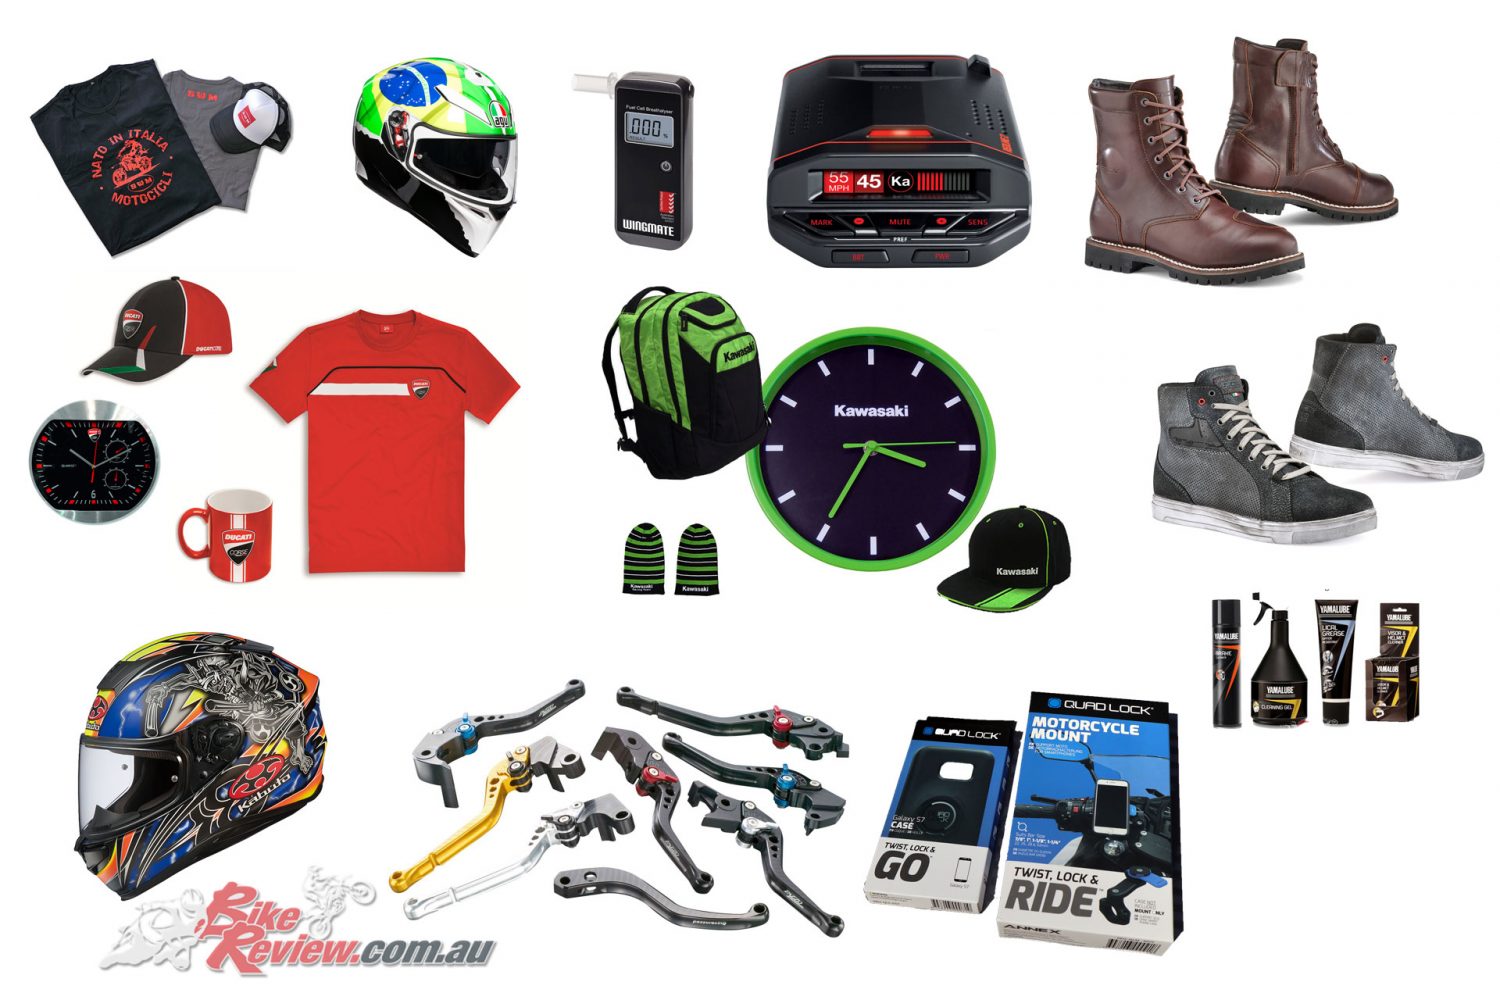 Father Day 2018 - Gift Ideas from Bike Review